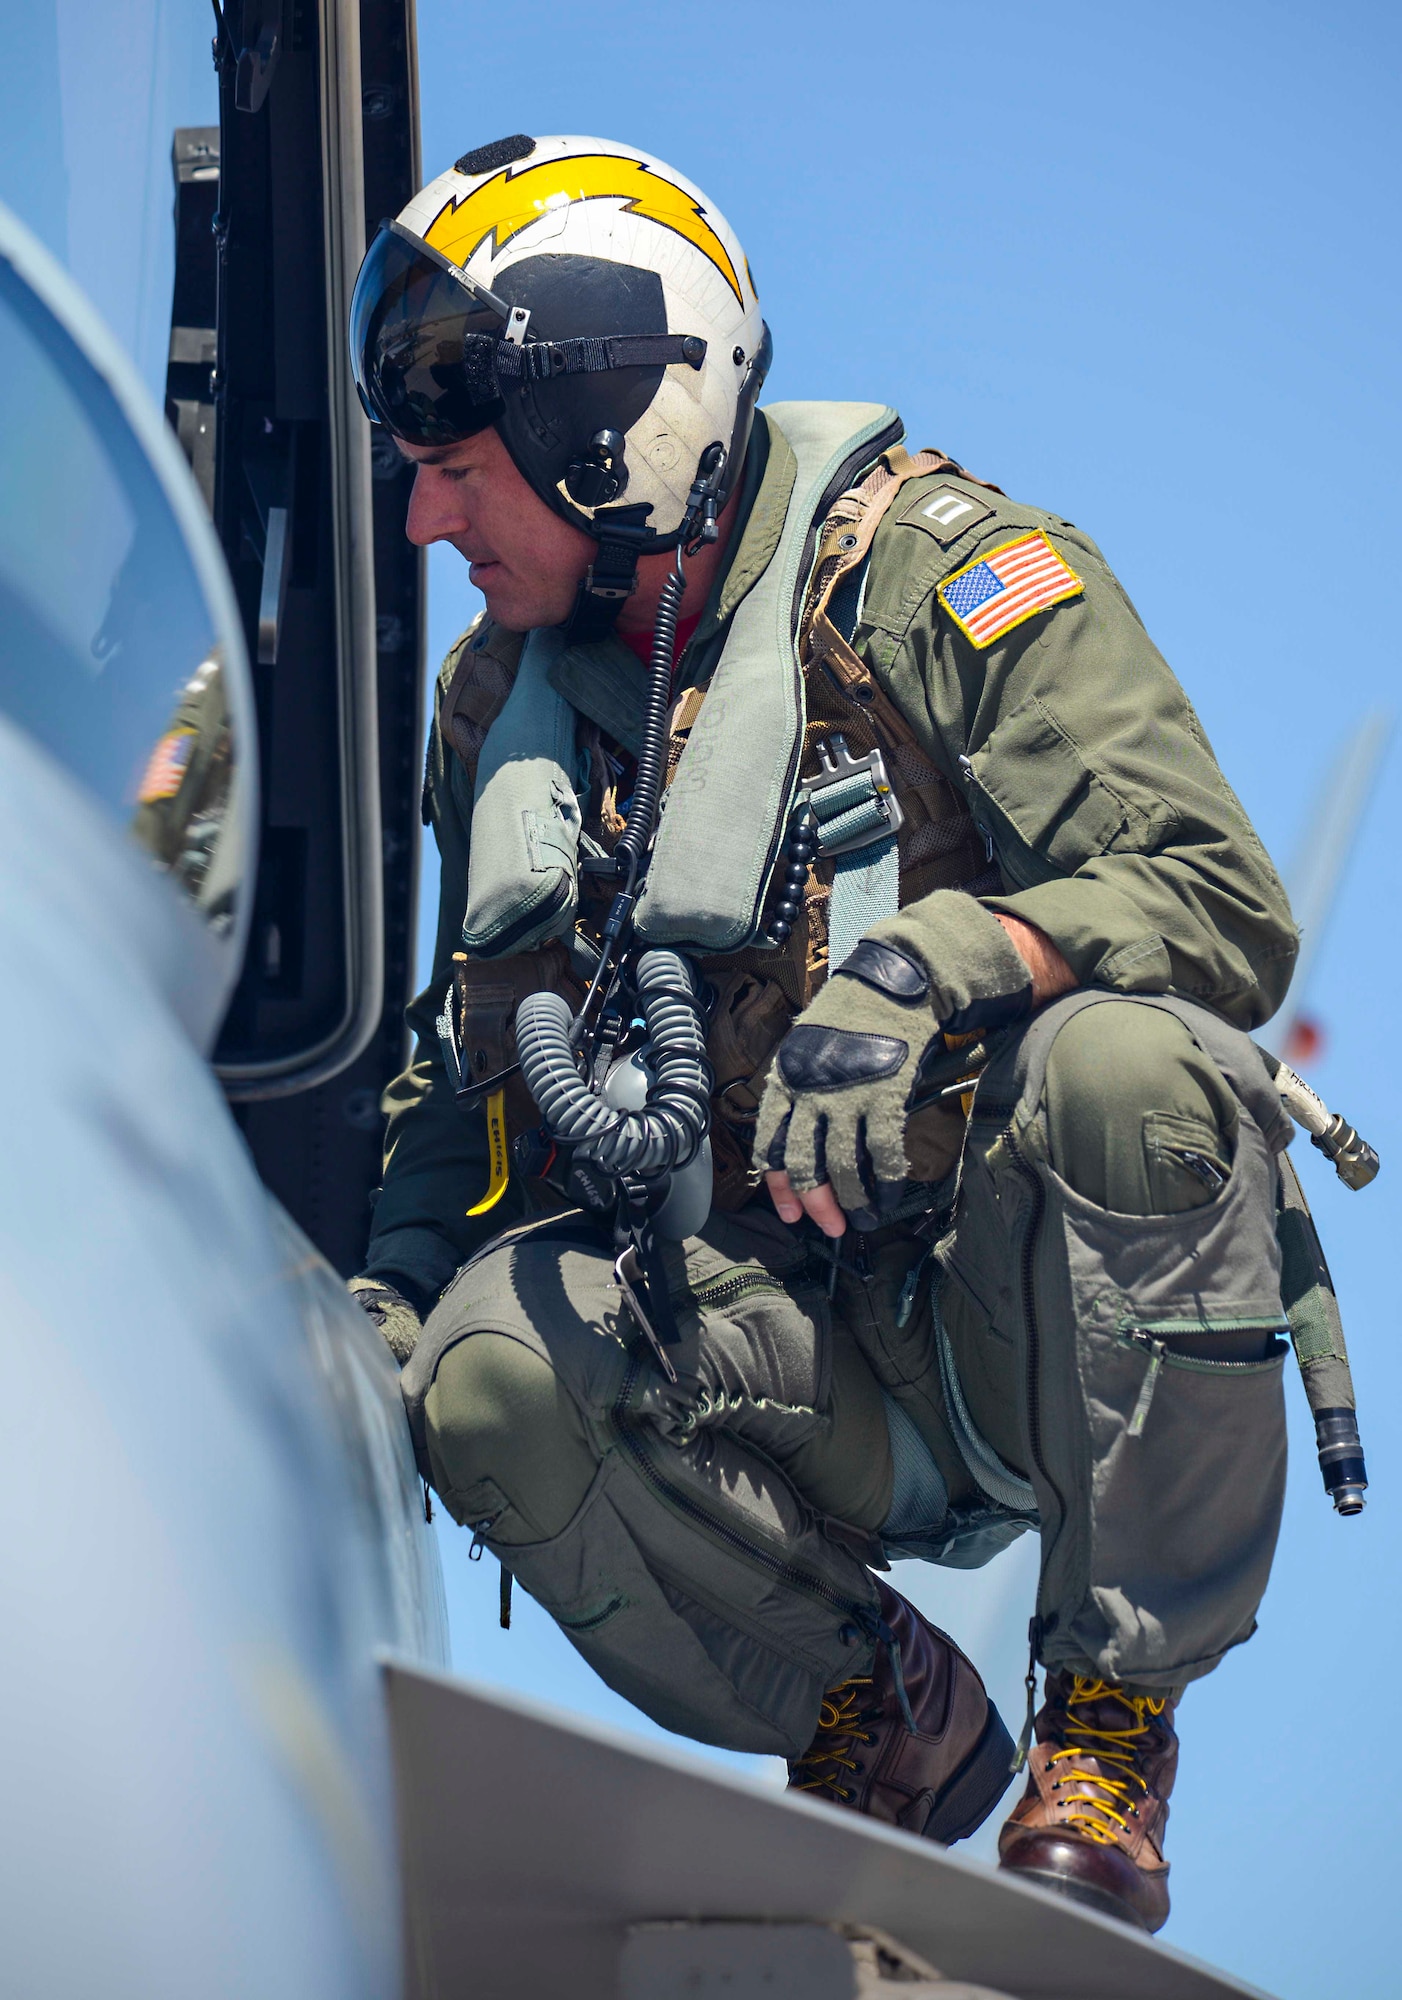 Navy EA-18G Growler Pilot Lt. Eric Holler, assigned to Electronic Attack Squadron (VAQ) 129, checks the cockpit of a Growler while training at Ellsworth Air Force Base, S.D., July 15, 2016. During the training, Naval aviators from the VAQ-129 were able to use the Powder River Training Complex near Ellsworth to complete necessary airborne electronic attack tactics. (U.S. Air Force photo by Airman 1st Class Sadie Colbert/Released)